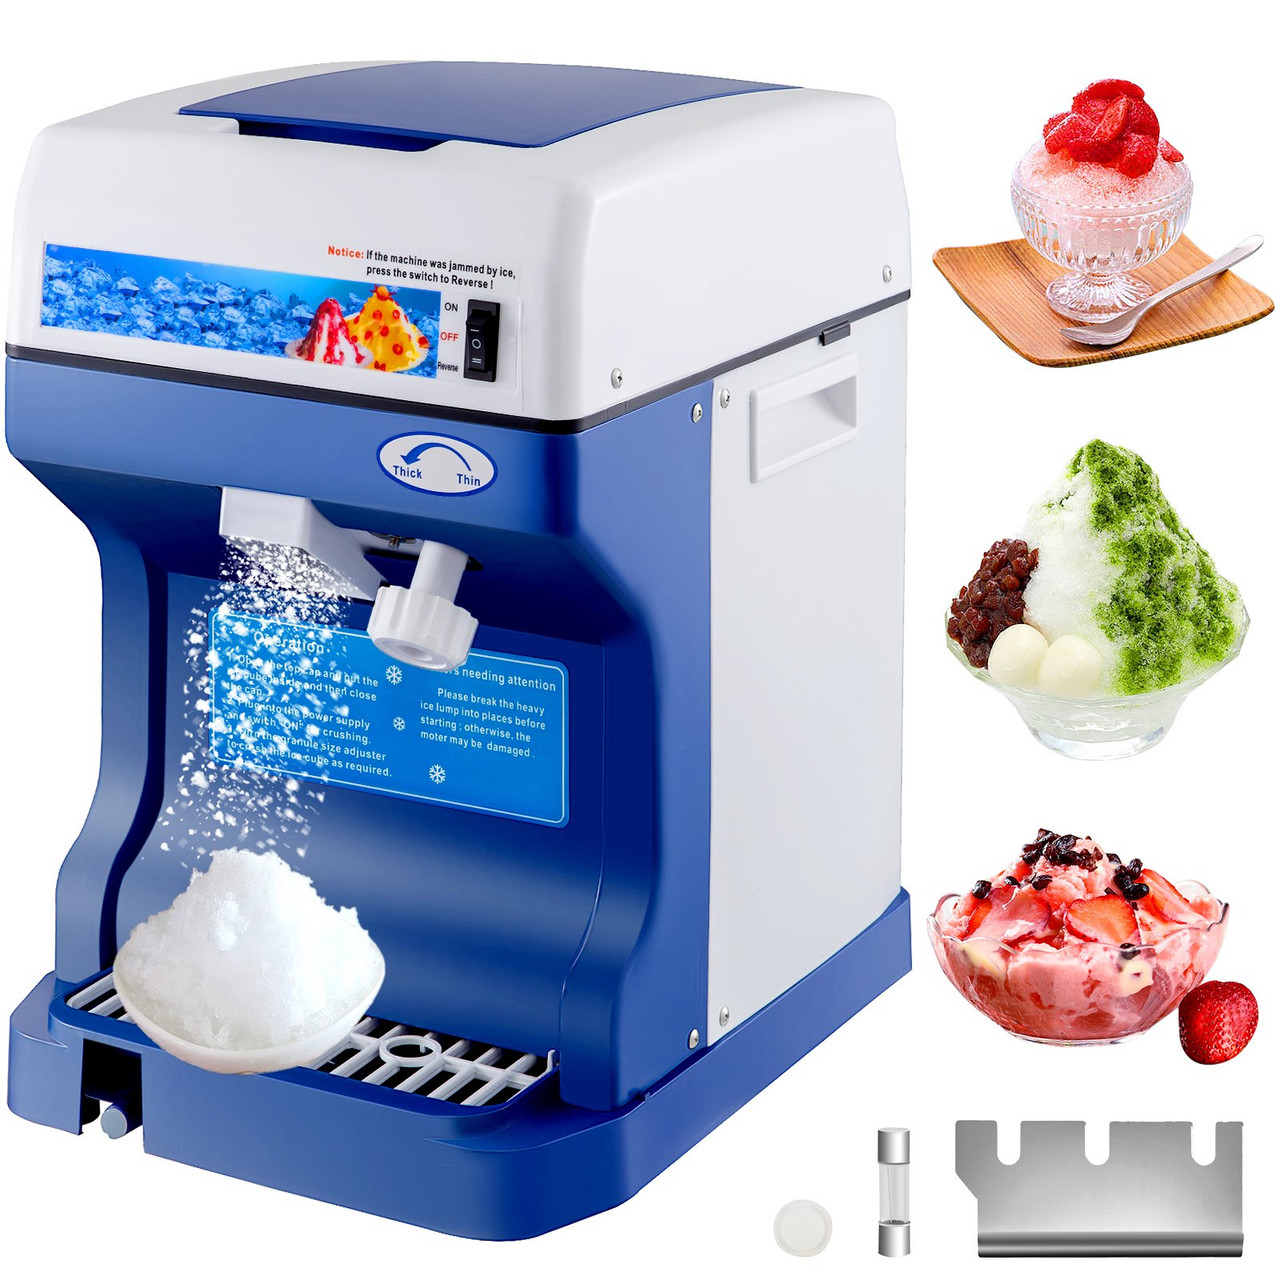 VEVOR 110V Electric Shaved Ice Machine 250W Snow Cone Maker Tabletop w/Adjustable Ice Texture, Ice Shaving Machine 265LBs/hr for Home and Commerical Use